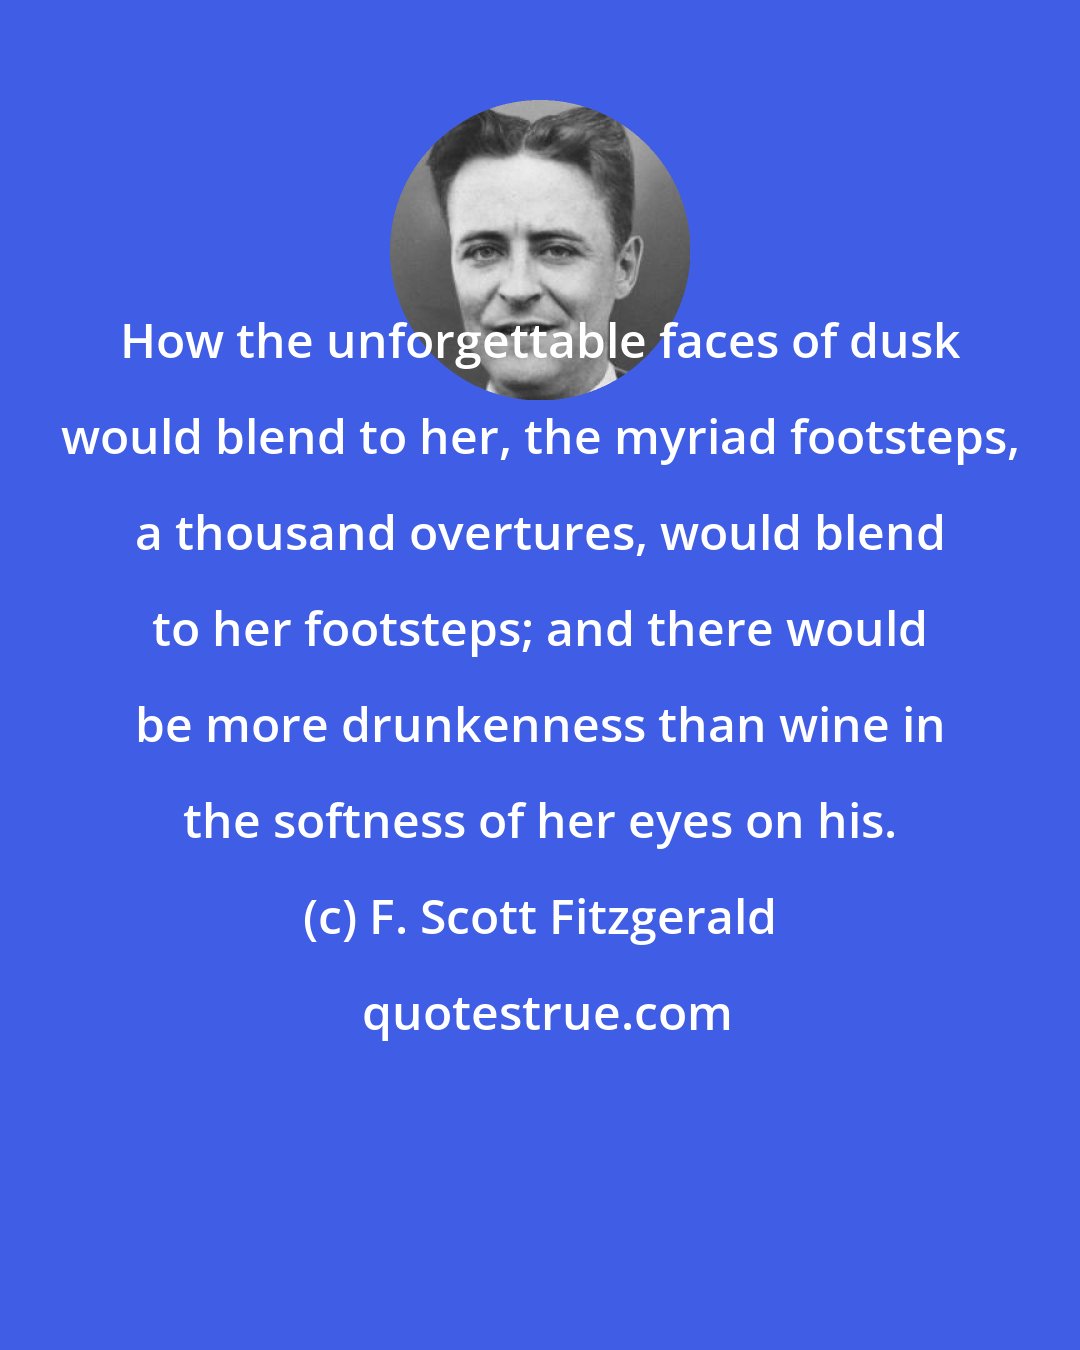 F. Scott Fitzgerald: How the unforgettable faces of dusk would blend to her, the myriad footsteps, a thousand overtures, would blend to her footsteps; and there would be more drunkenness than wine in the softness of her eyes on his.